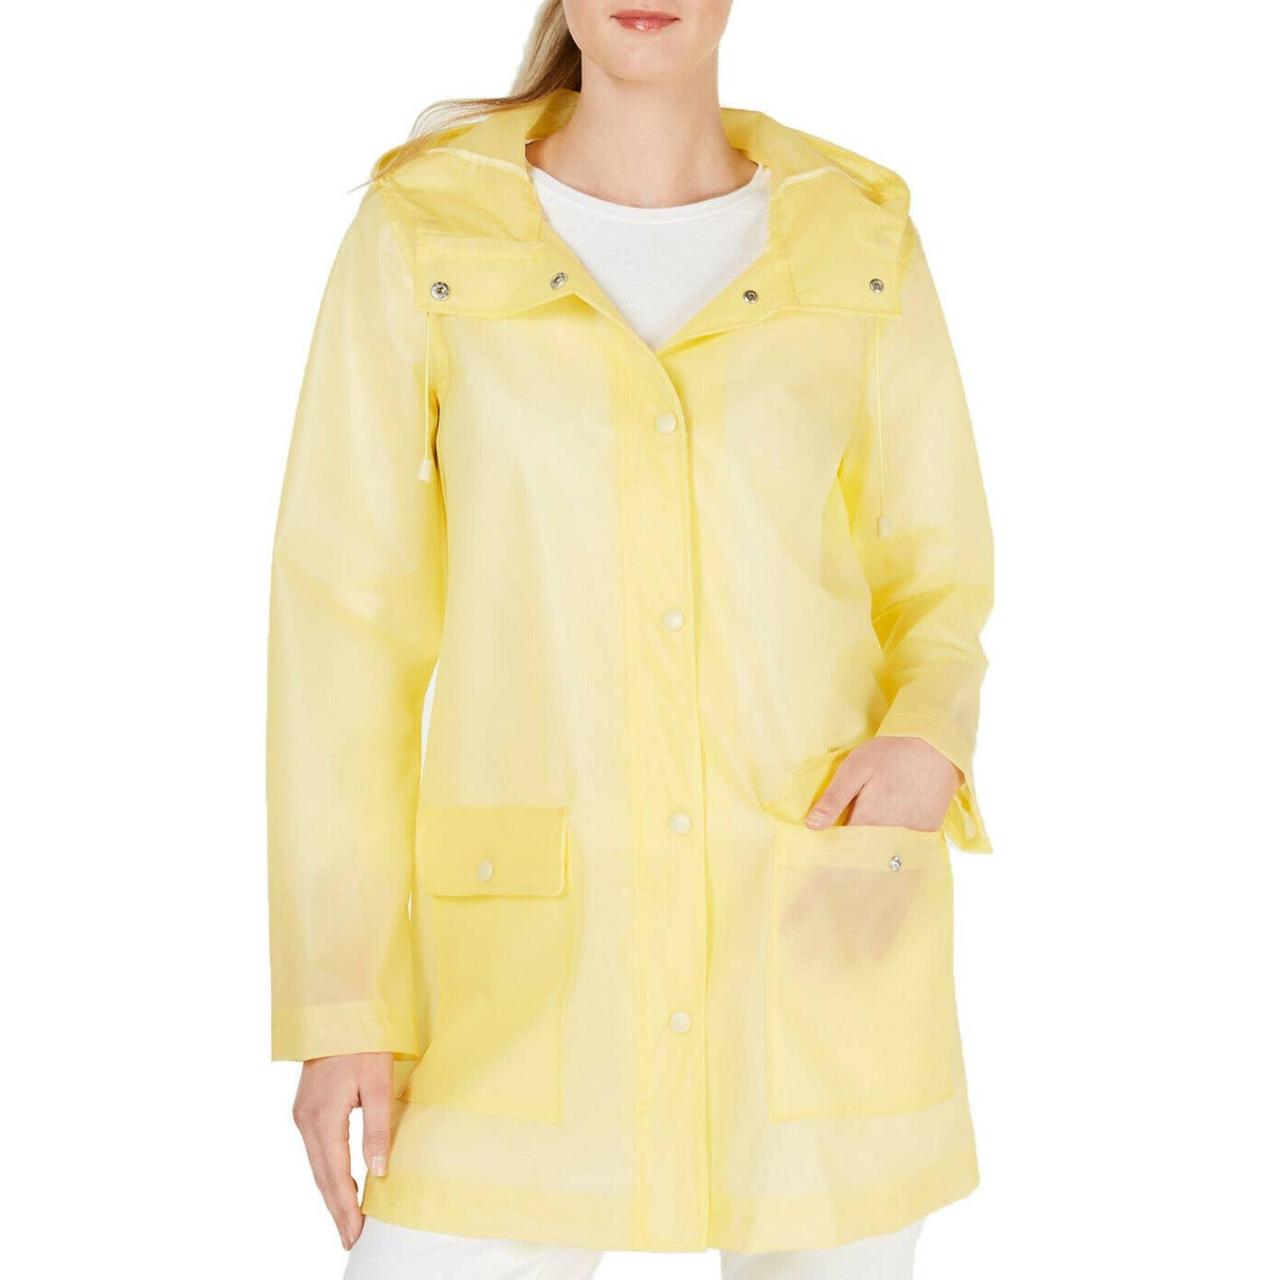 Product Image 2 - COLLECTION B WOMEN'S YELLOW HOODED